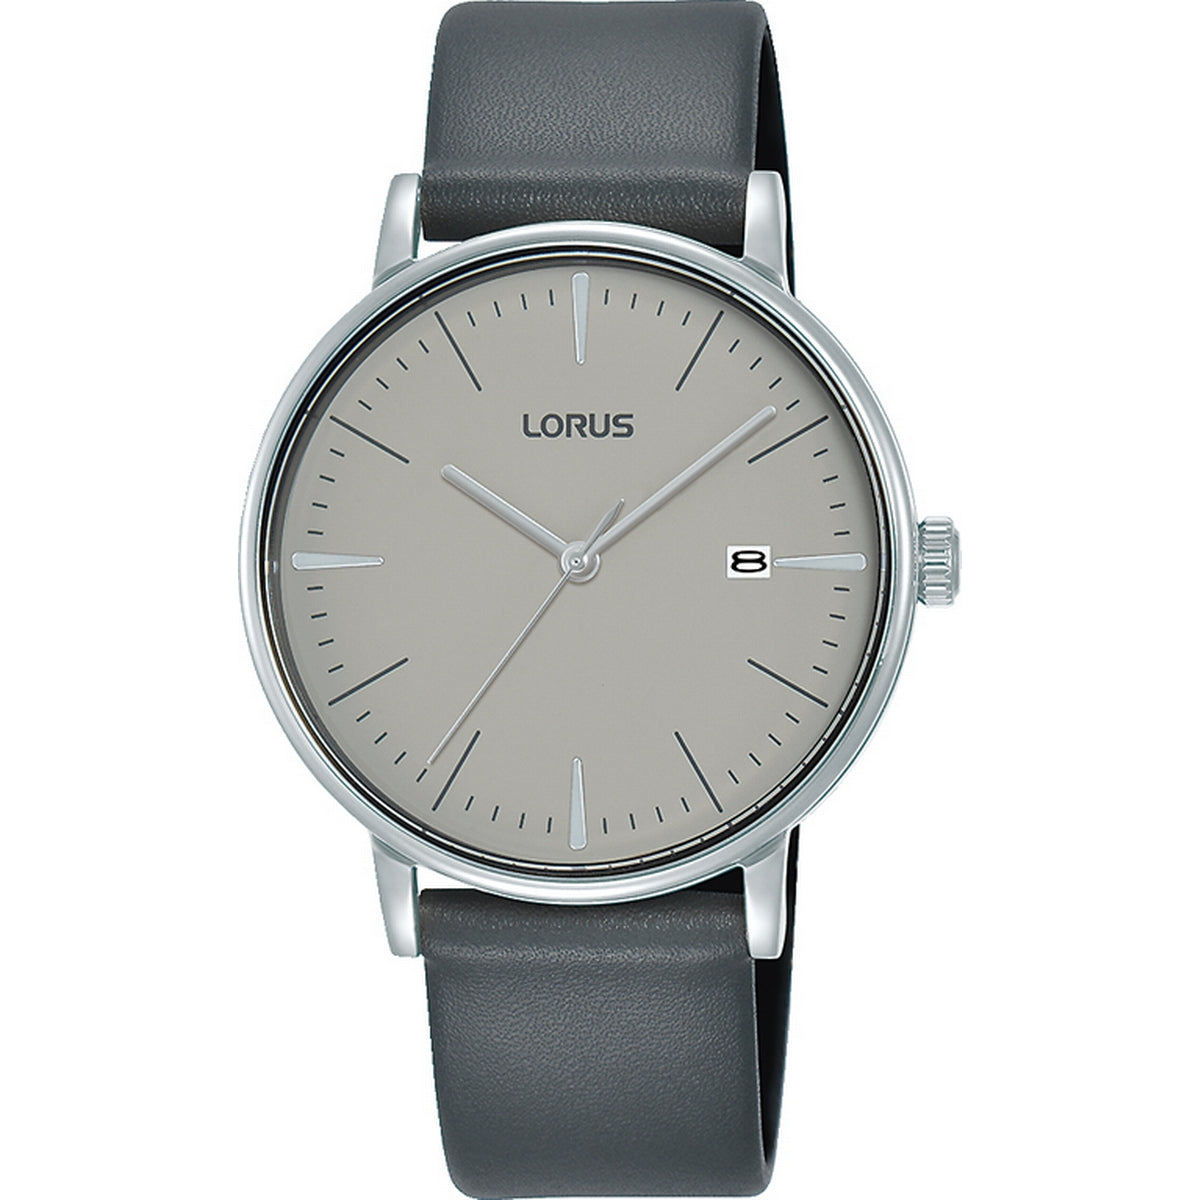 lorus Jewellers stainless grey steel dial quartz watch Moores - strap gents